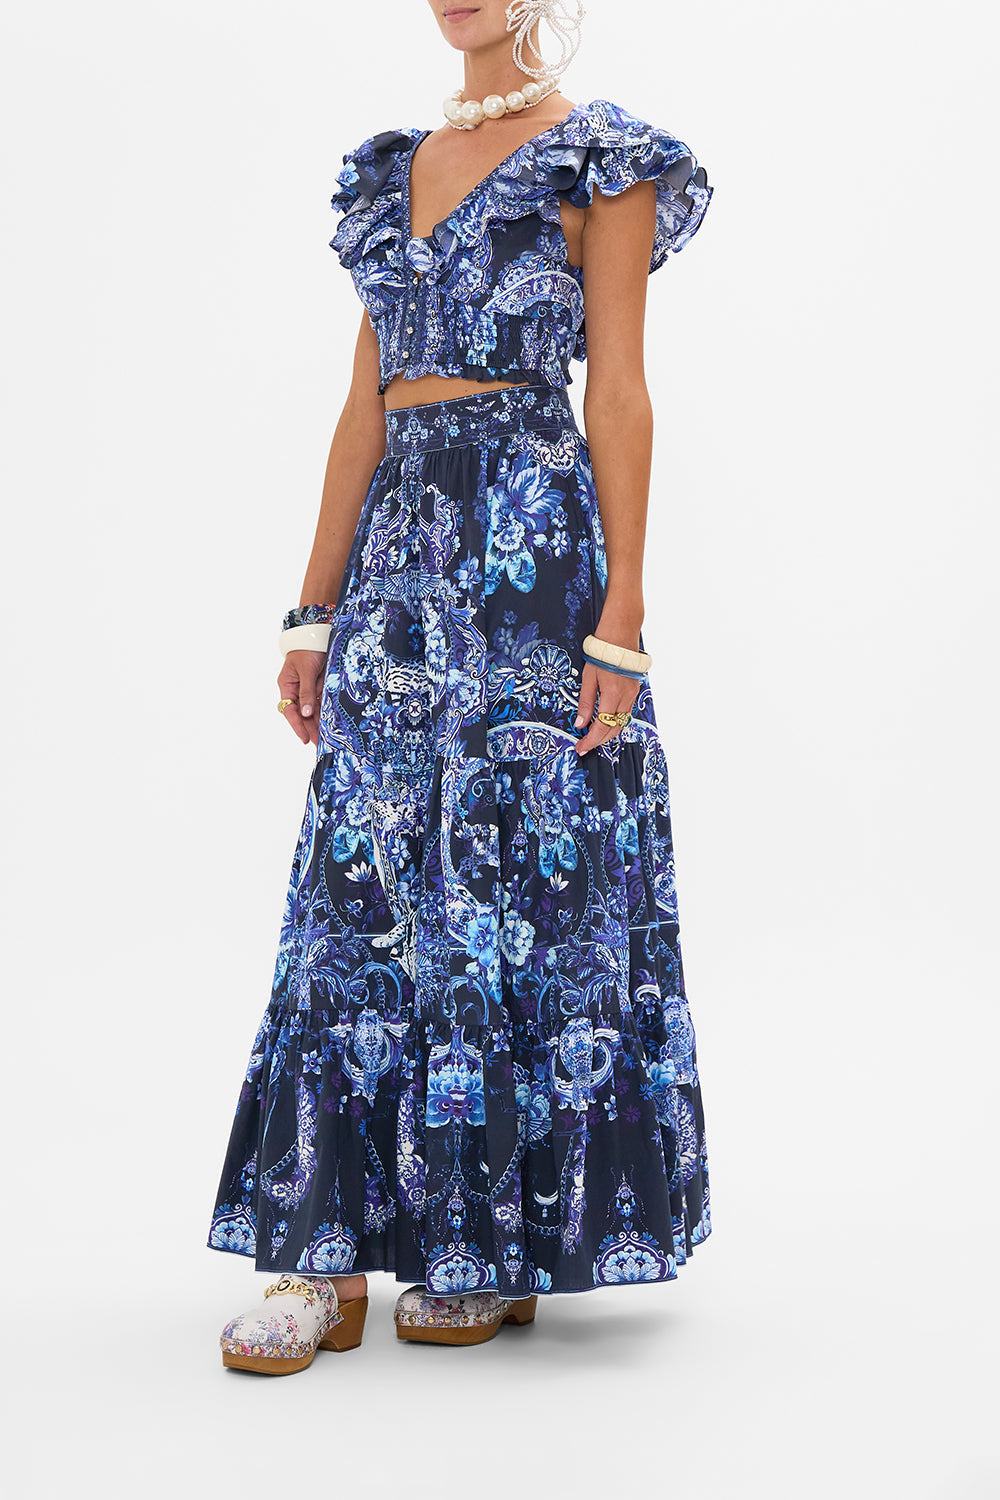 Side view of model wearing CAMILLA ruffle top in Delft Dynasty print 